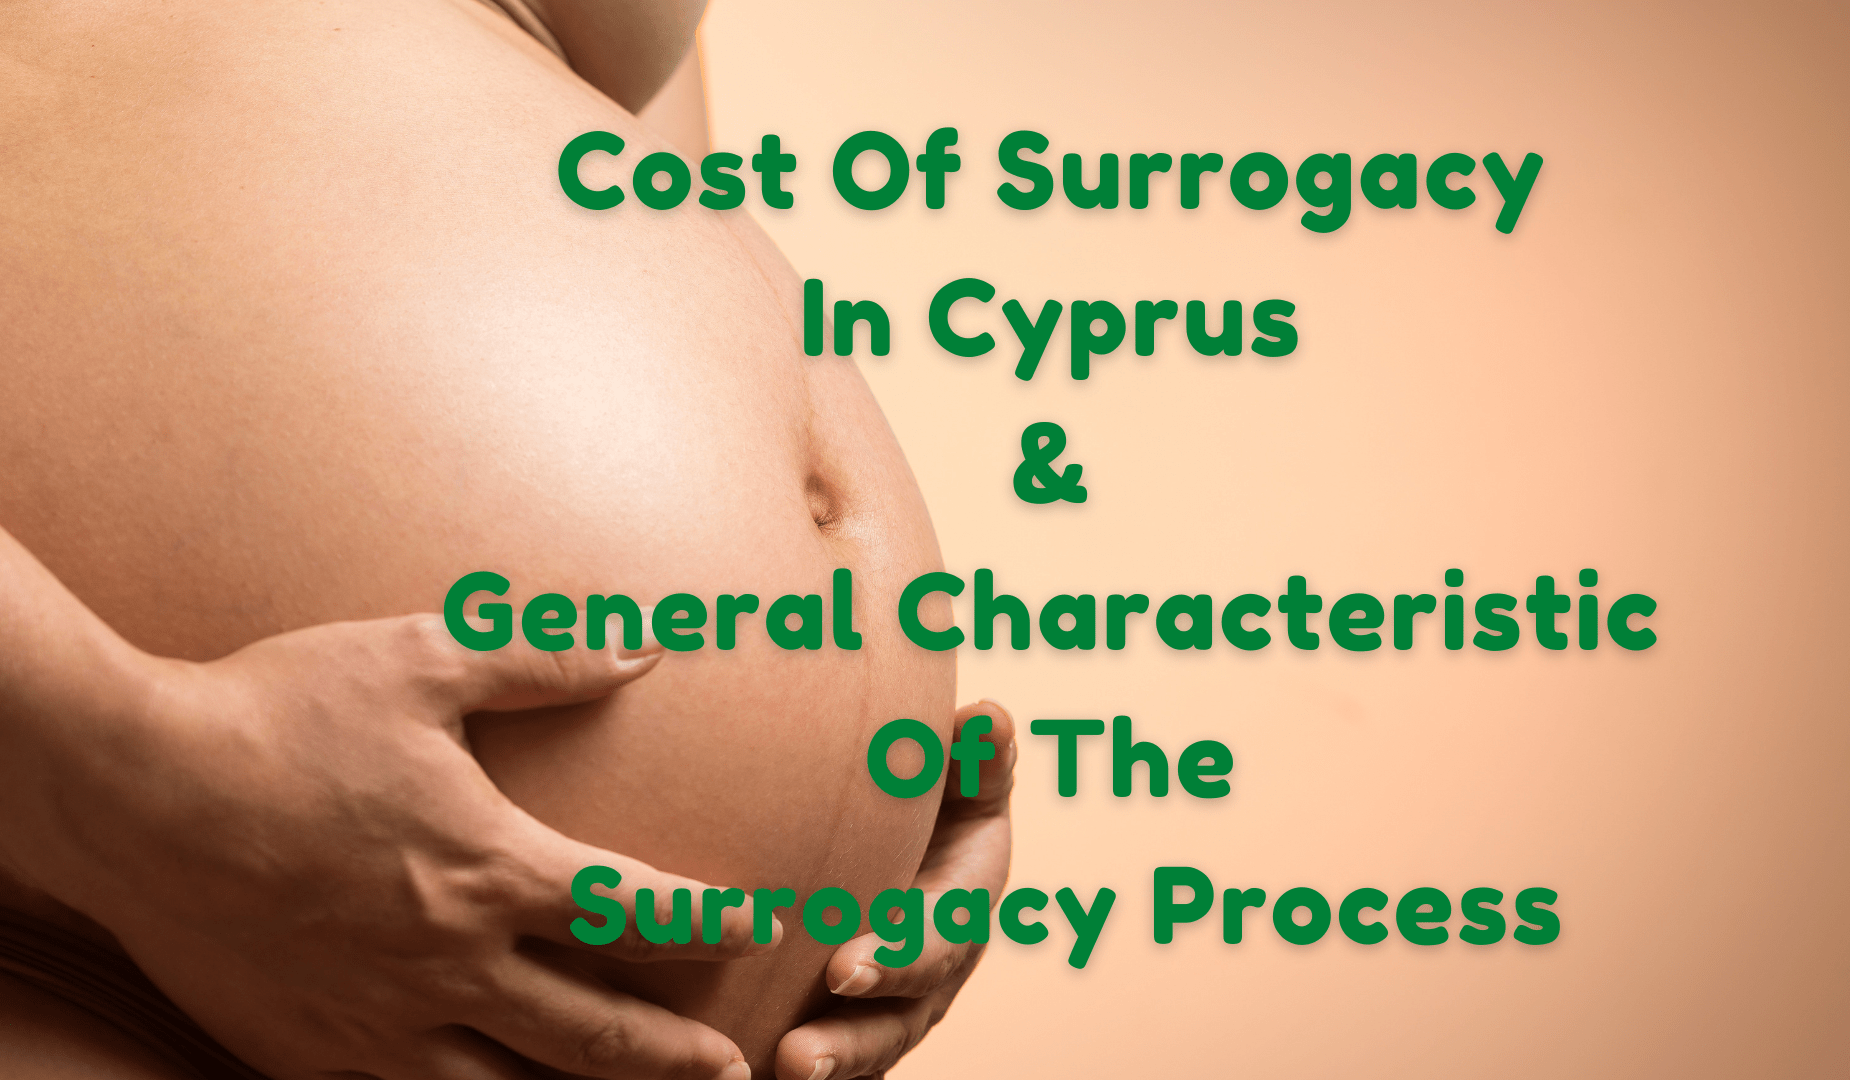 Cost Of Surrogacy In Cyprus And General Characteristic Of The Surrogacy Process